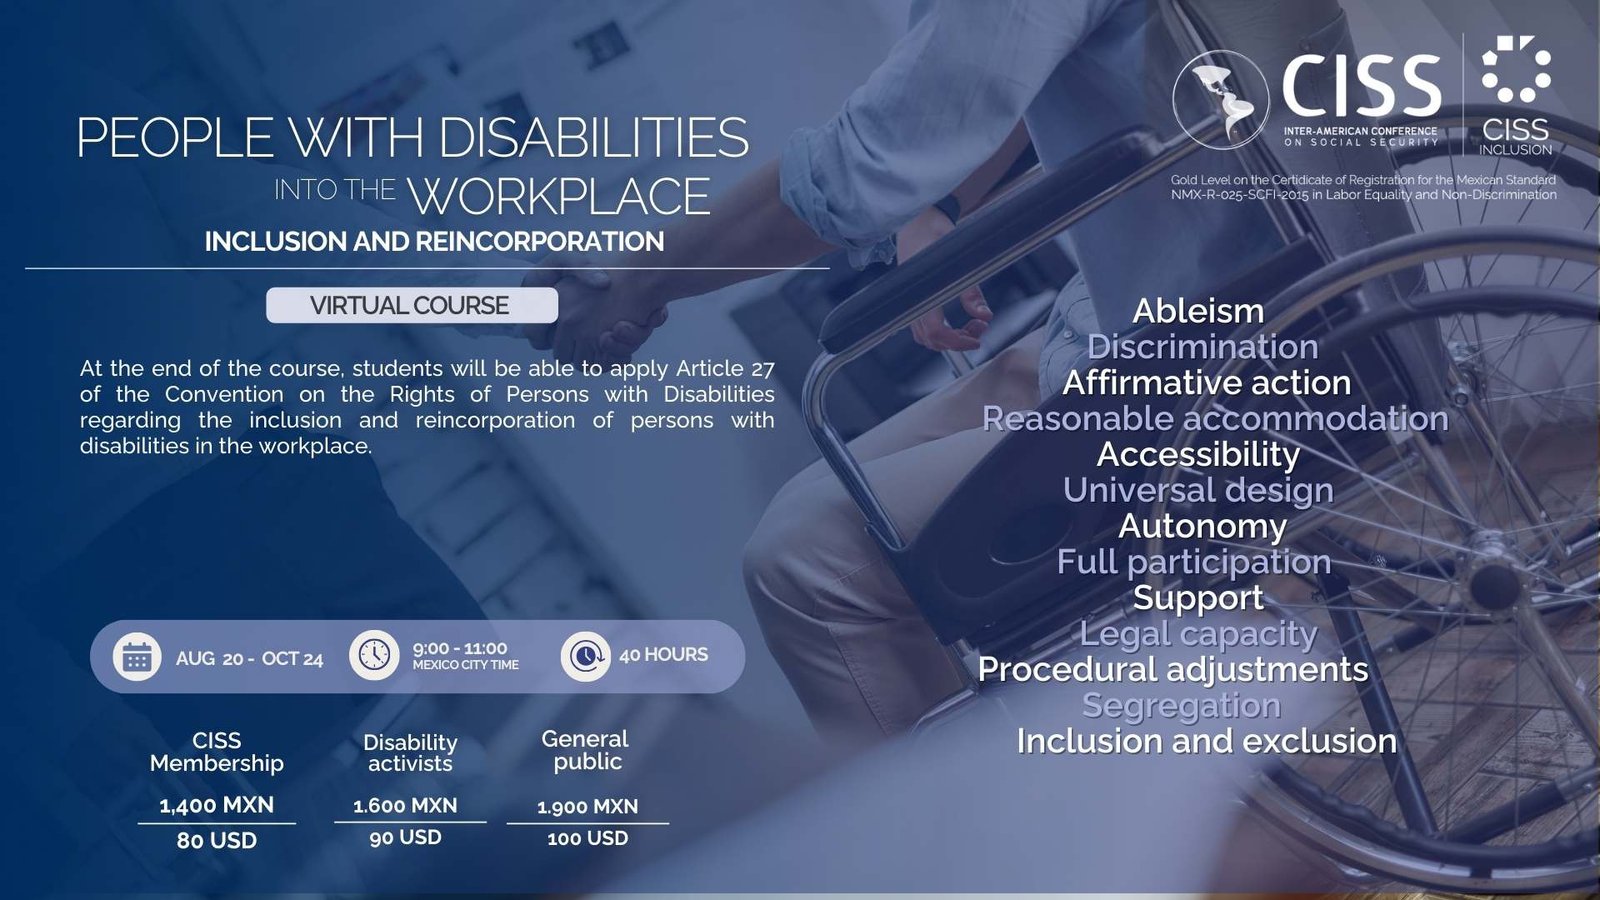 Inclusion and reincorporation of people with disabilities into the workplace